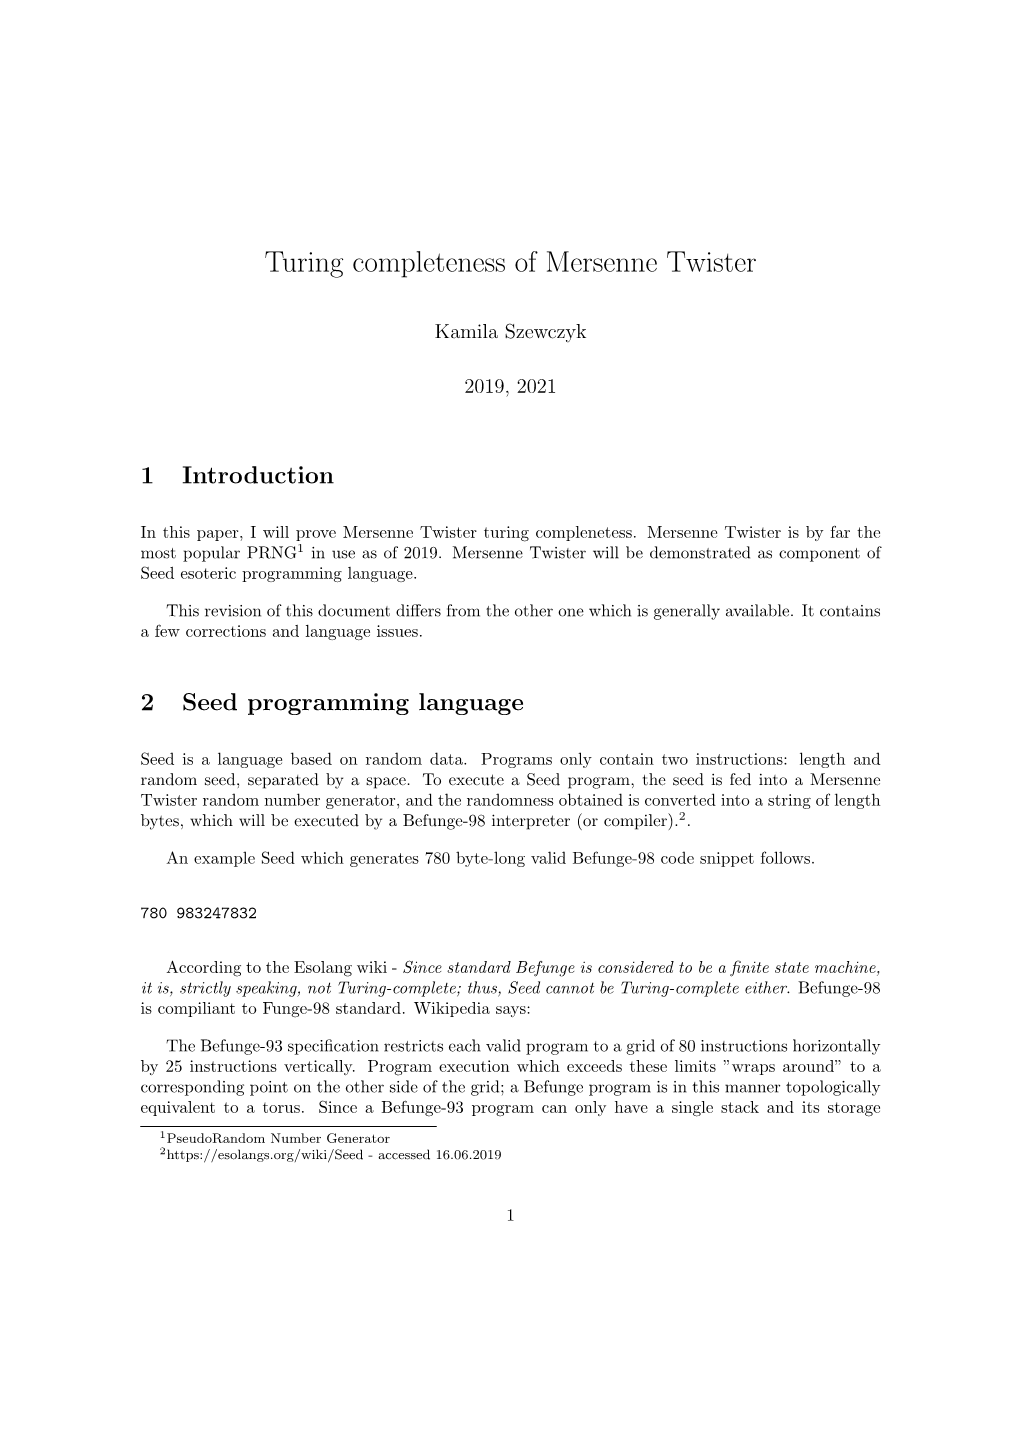 Turing Completeness of Mersenne Twister